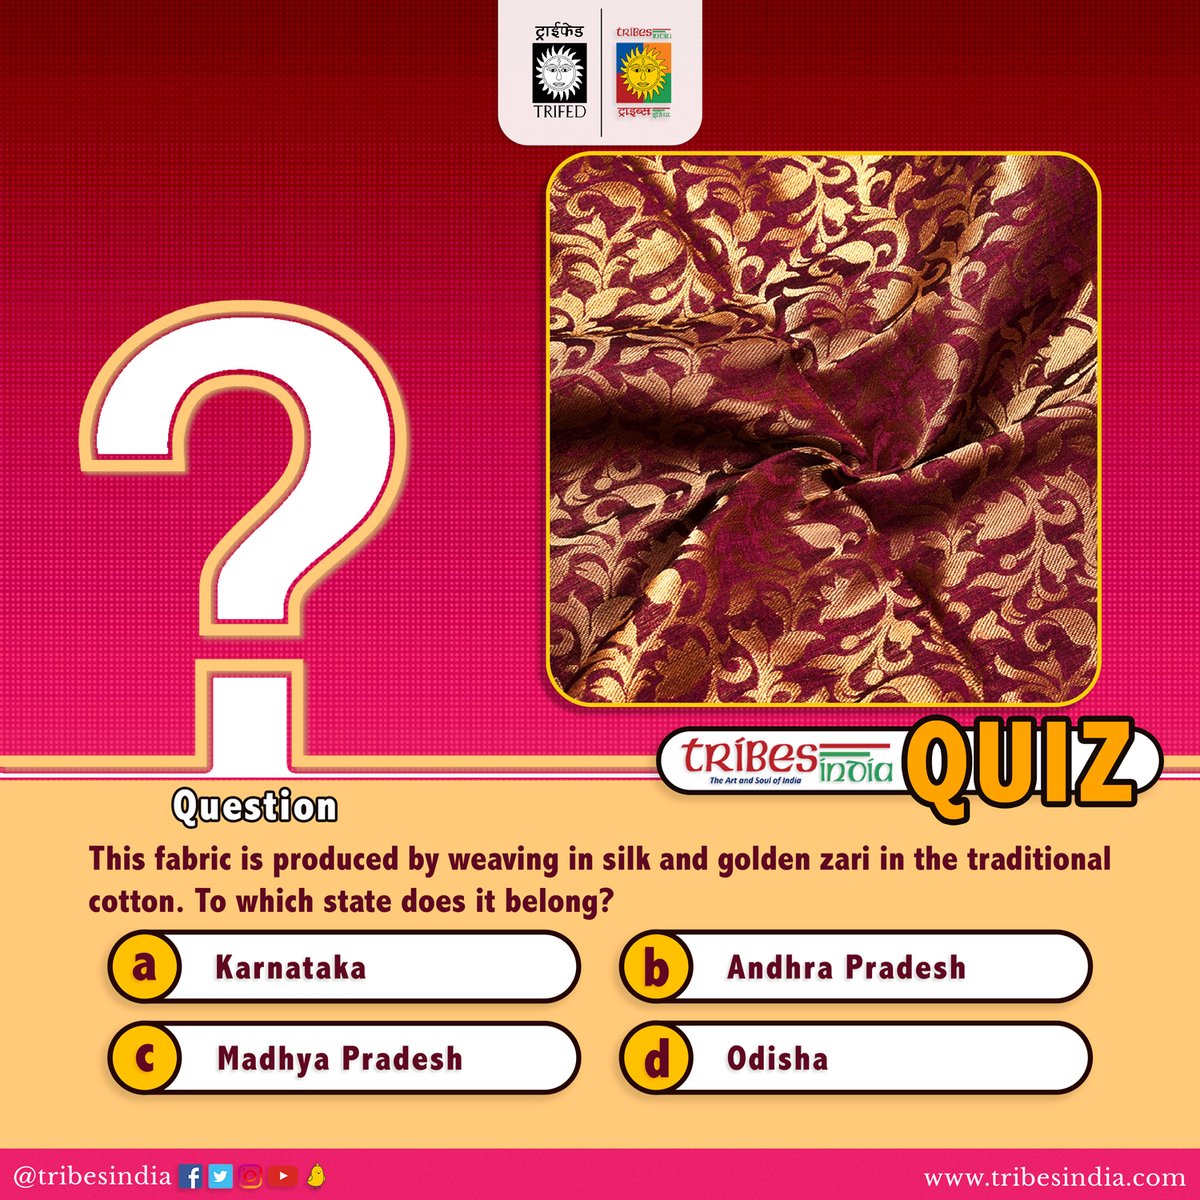 This fabric is produced by weaving in silk and golden #zari in traditional cotton. To which state does it belong?

a)Karnataka
b)Andhra Pradesh
c)Madhya Pradesh
d)Odisha

Please respond with the correct option👇.
#Vocal4Local #BuyTribal #QuizTime